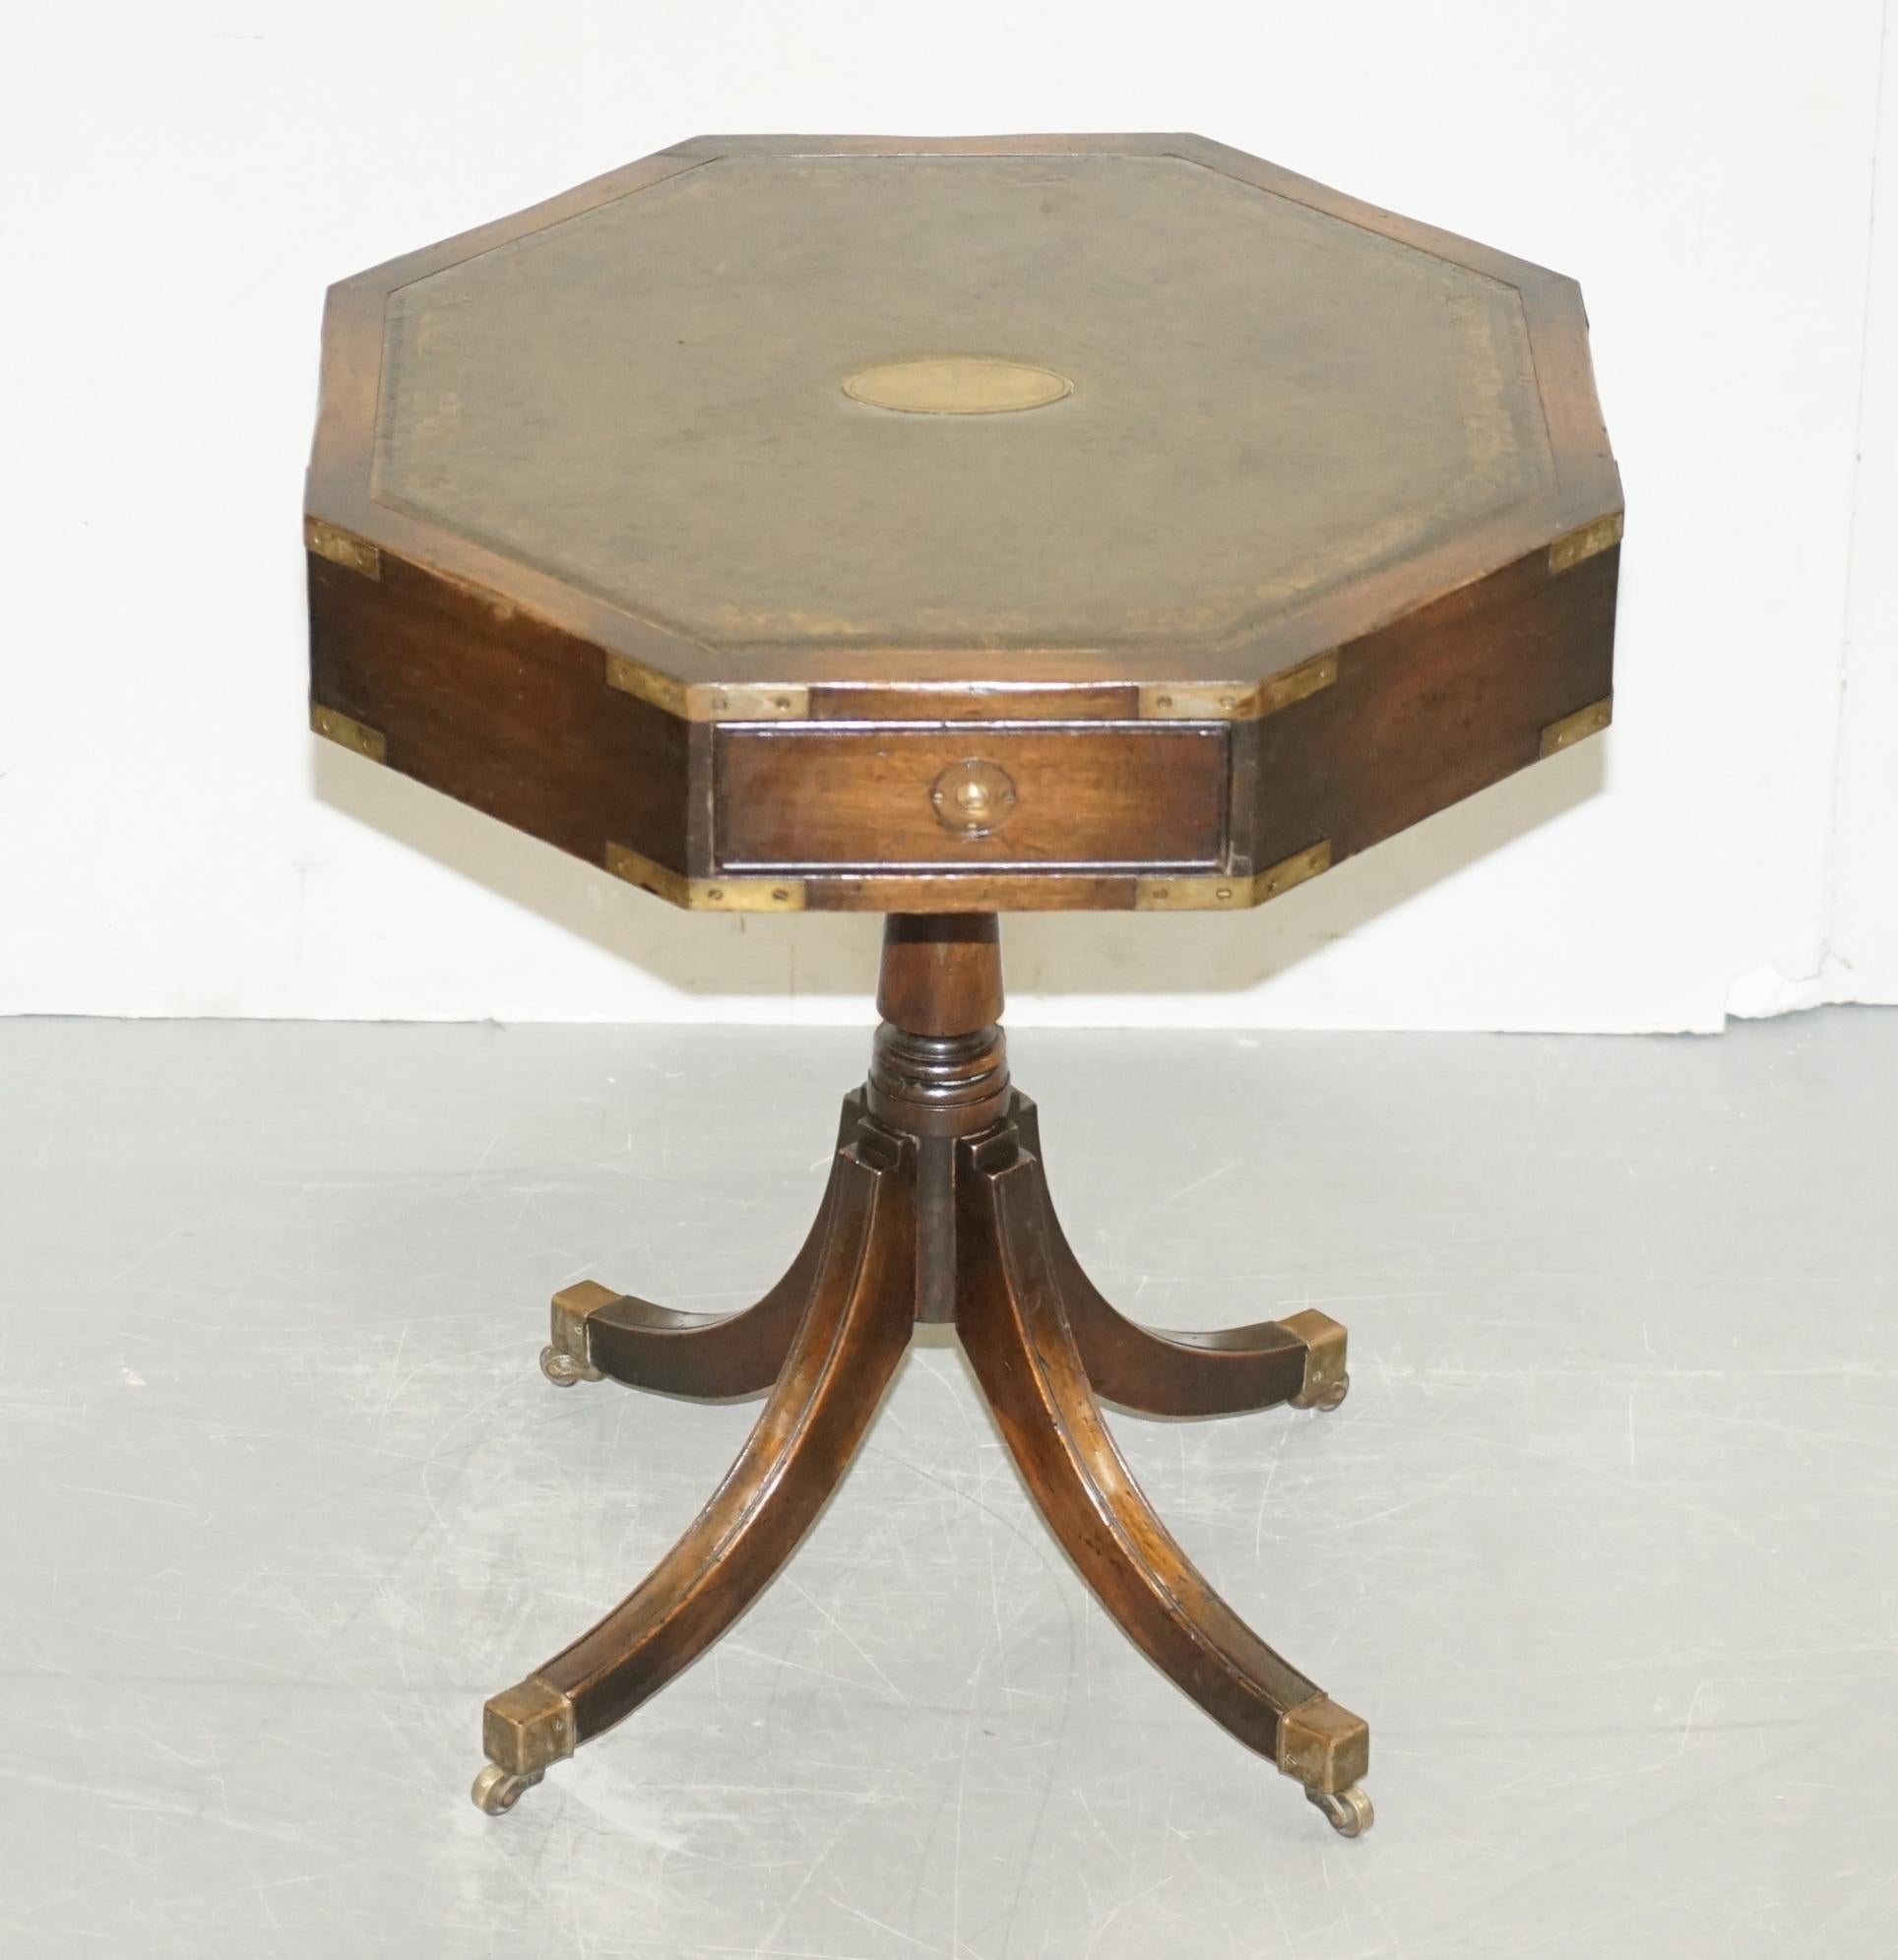 We are delighted to offer for sale this lovely Regency style mahogany drum table made in the Military Campaign style with leather top 

A good looking piece, the leather top has nicely aged, it has gold leaf embossing, the handles are all original